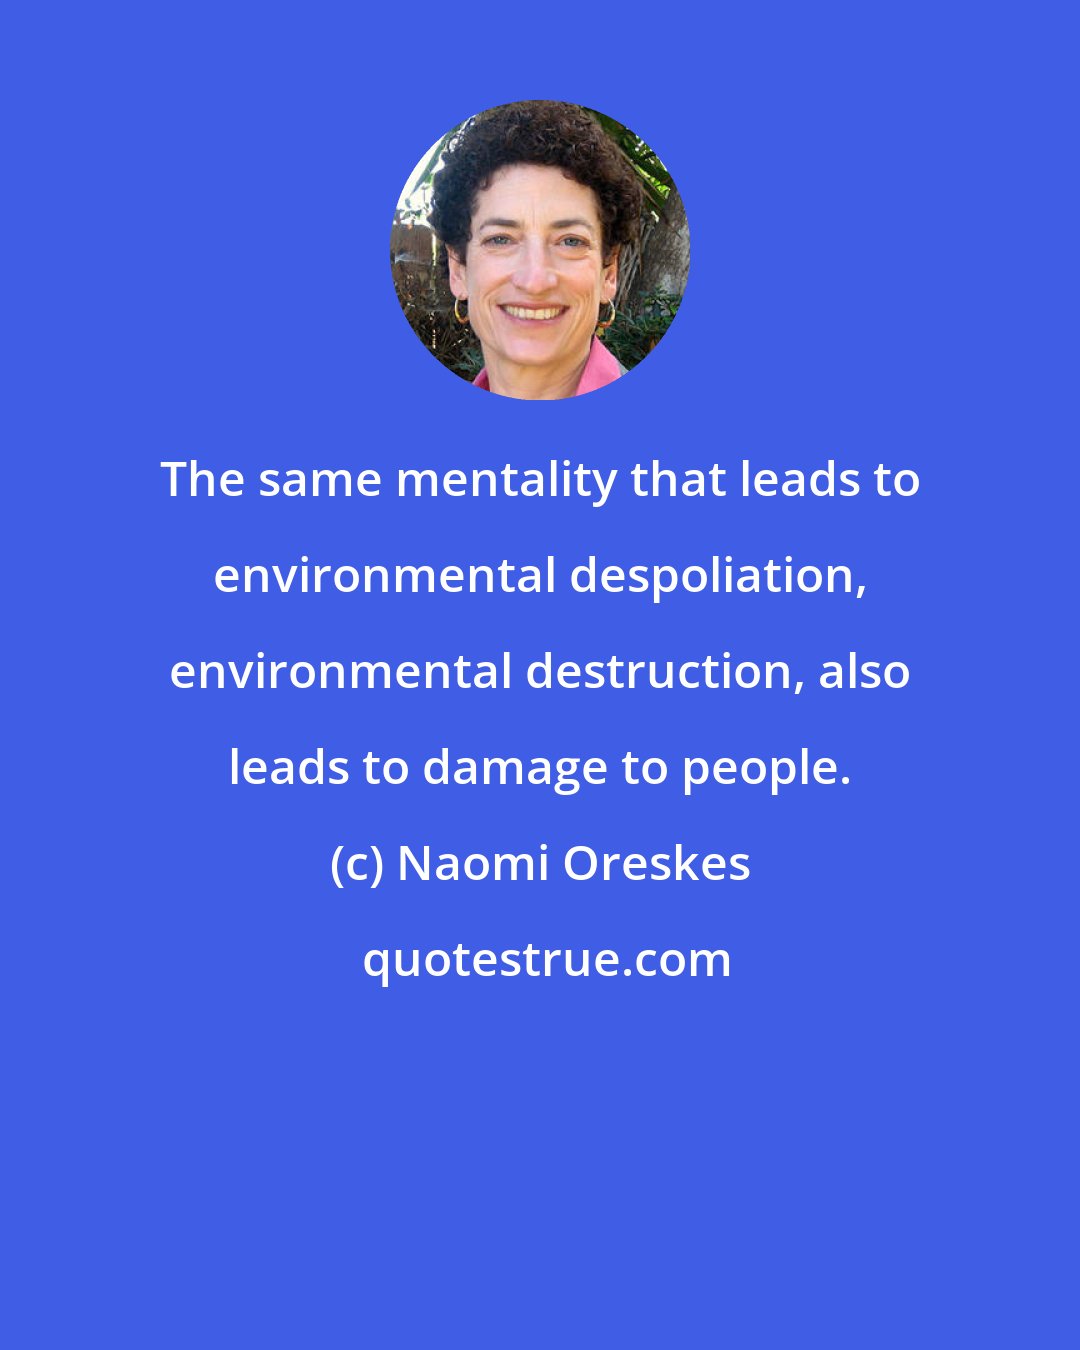 Naomi Oreskes: The same mentality that leads to environmental despoliation, environmental destruction, also leads to damage to people.